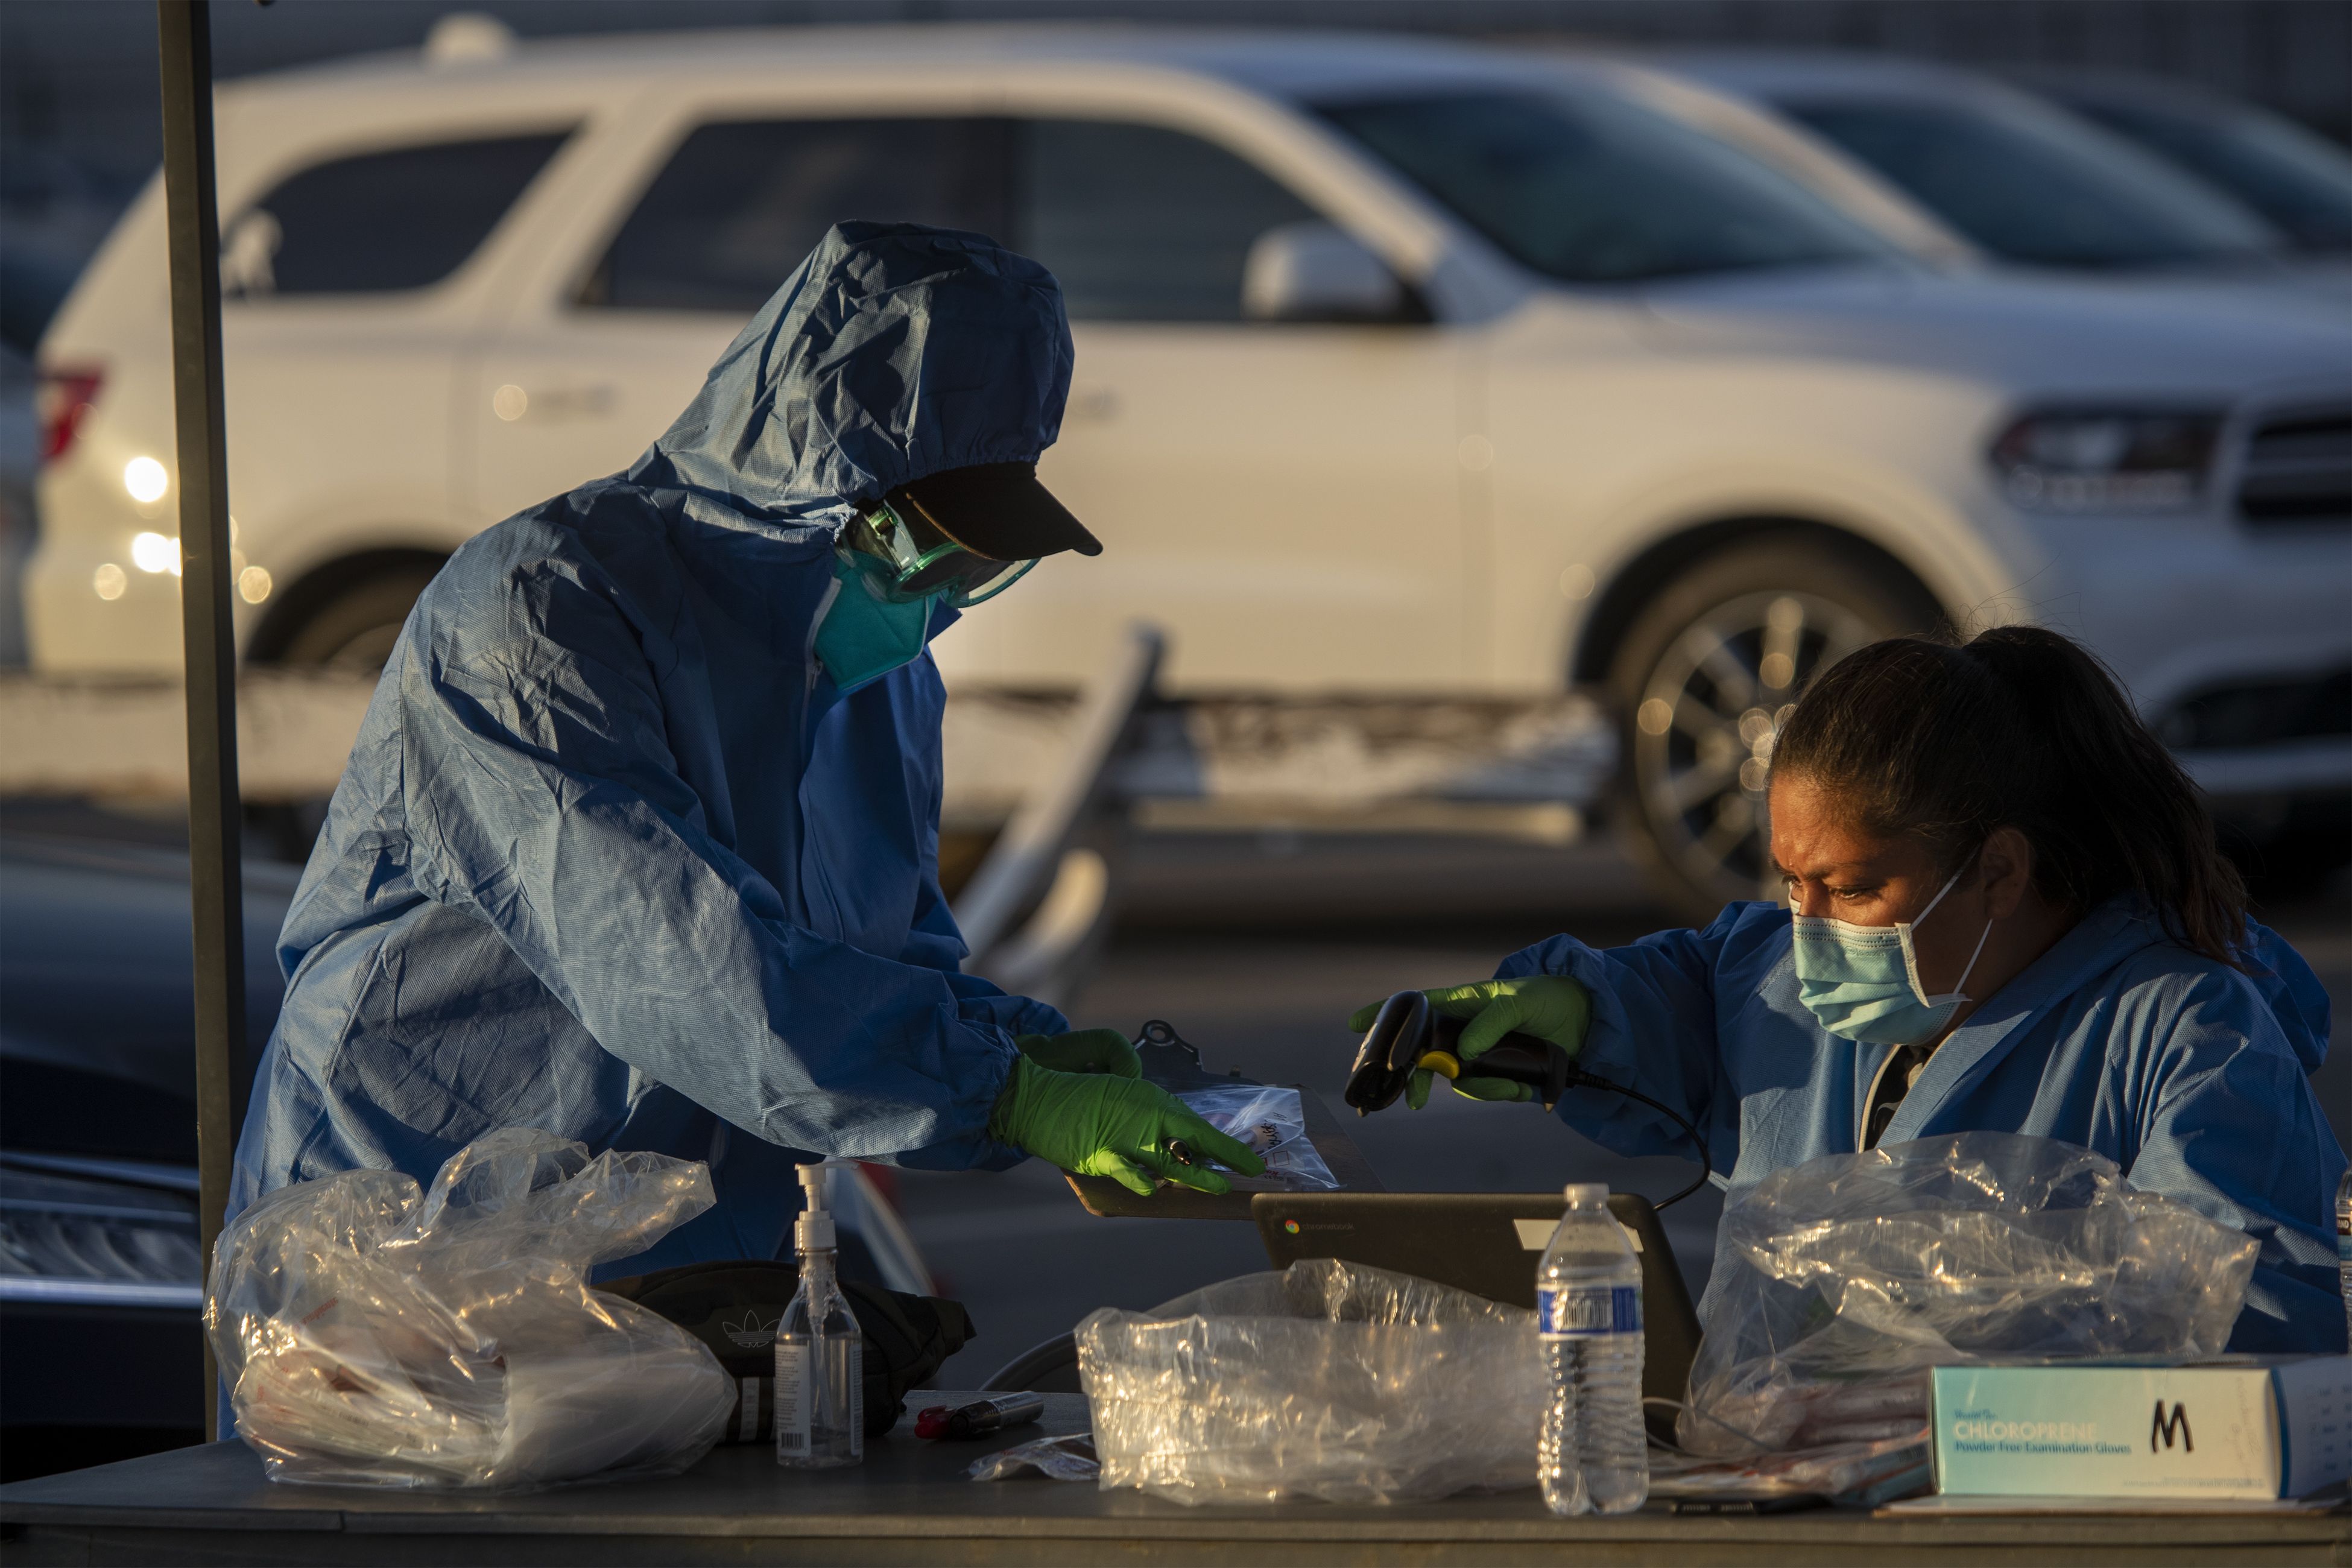 Health care workers prepare COVID-19 tests to hand out to long lines of subjects who self-administer the tests at Long Beach City College-Veterans Memorial Stadium on Wednesday, Dec. 9